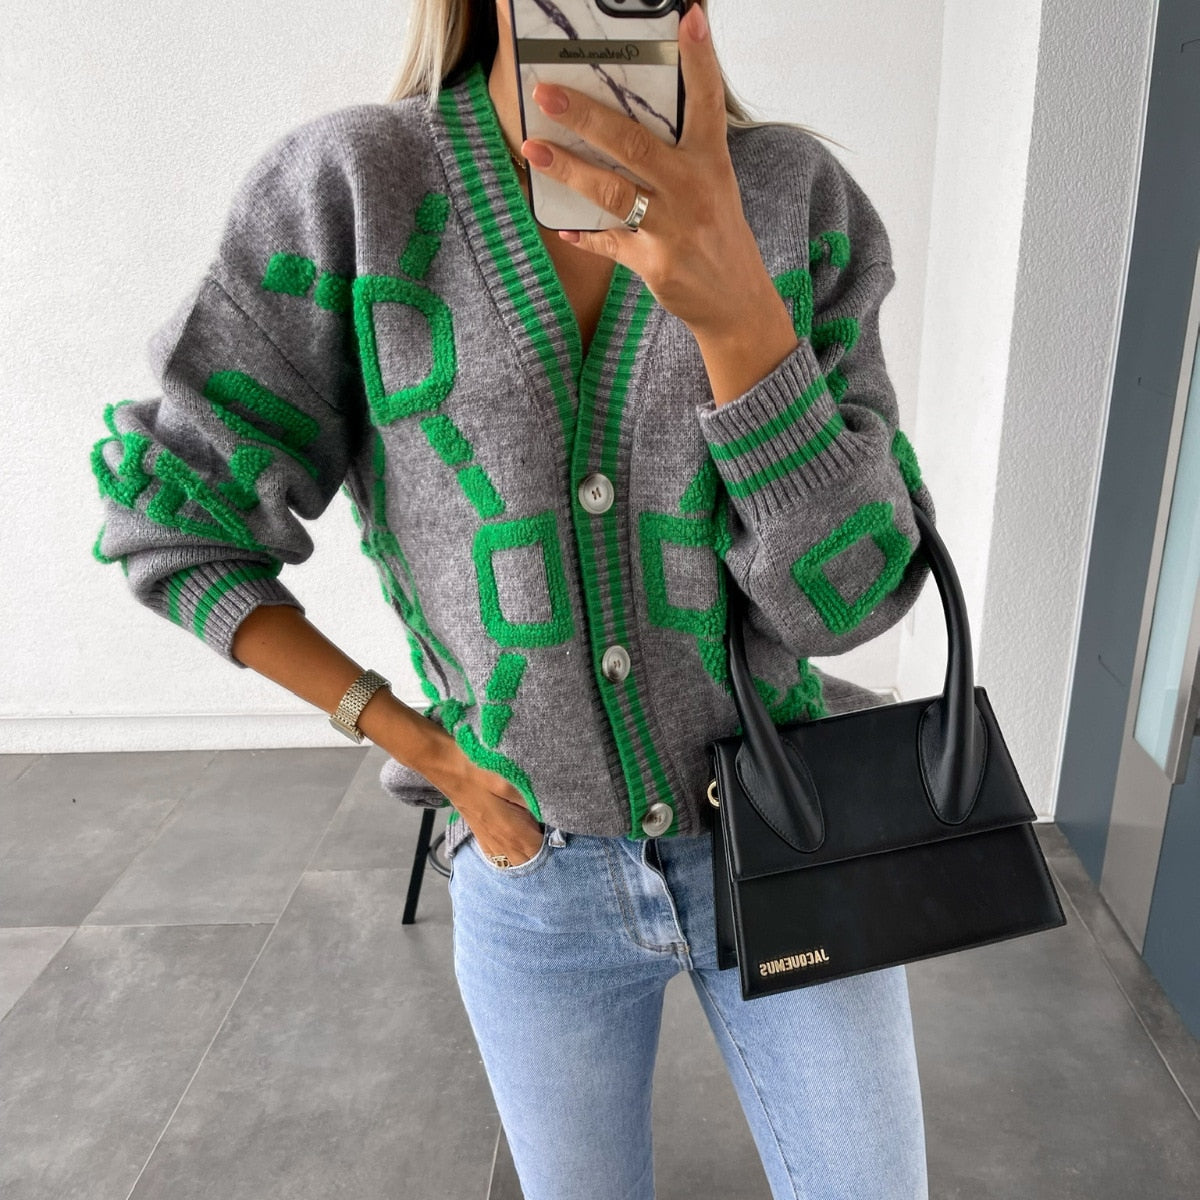 Cryptographic Autumn Winter Knitted Button Up Loose Cardigan Sweater Women Long Sleeve Tops Oversized Sweaters Warm Sueters Coat